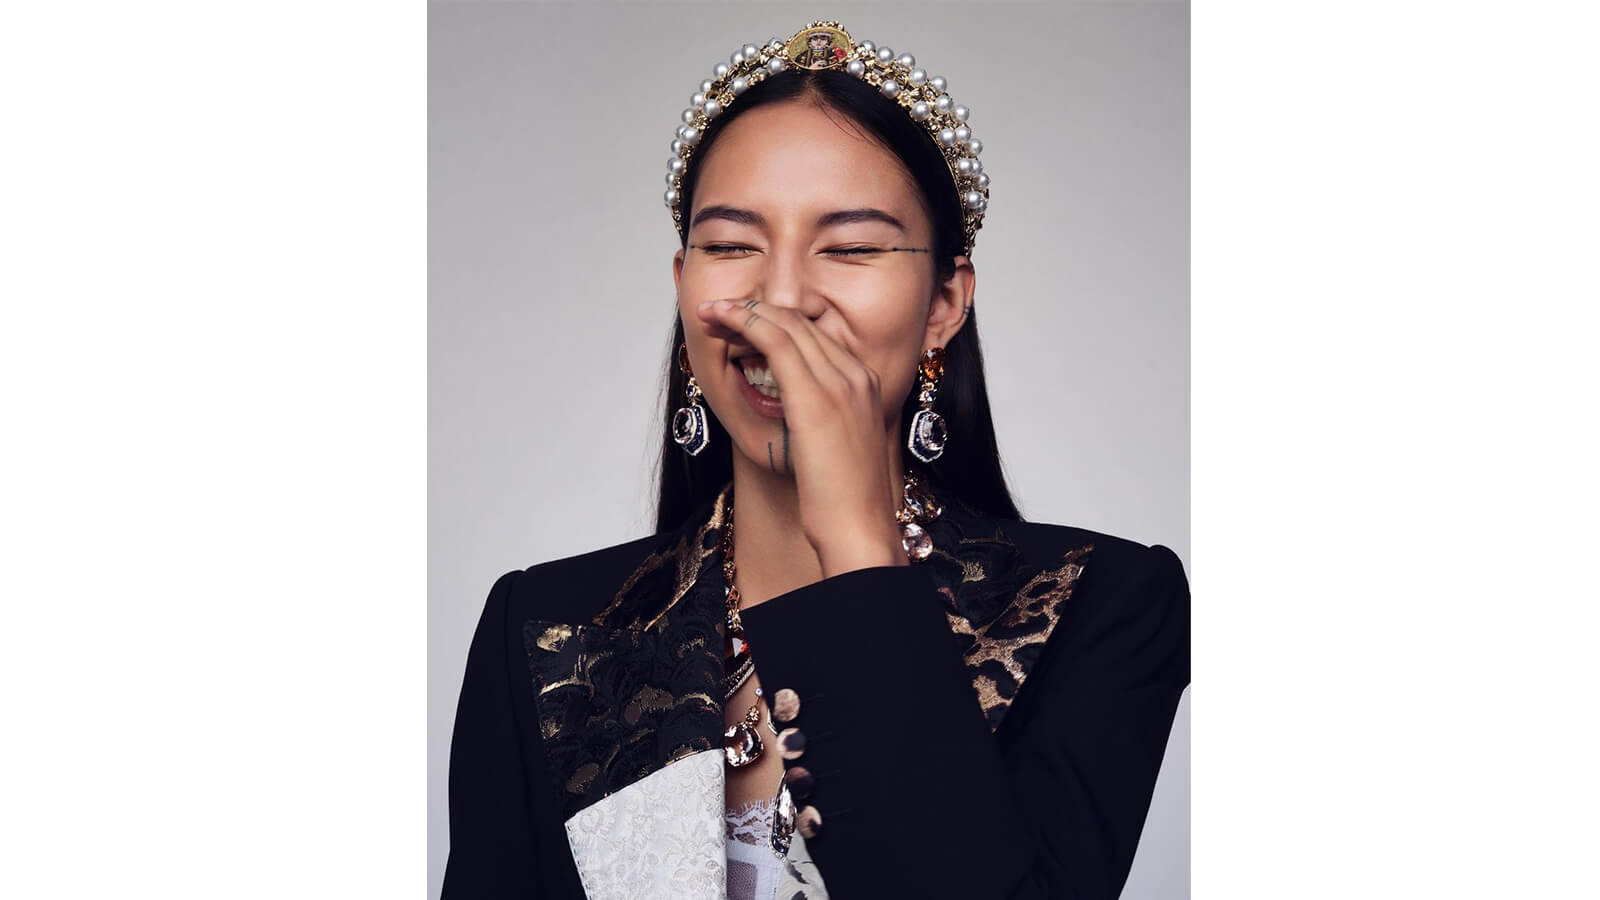 Brunette model with tribal facial tattoos, laughs into hand wearing pearl crown